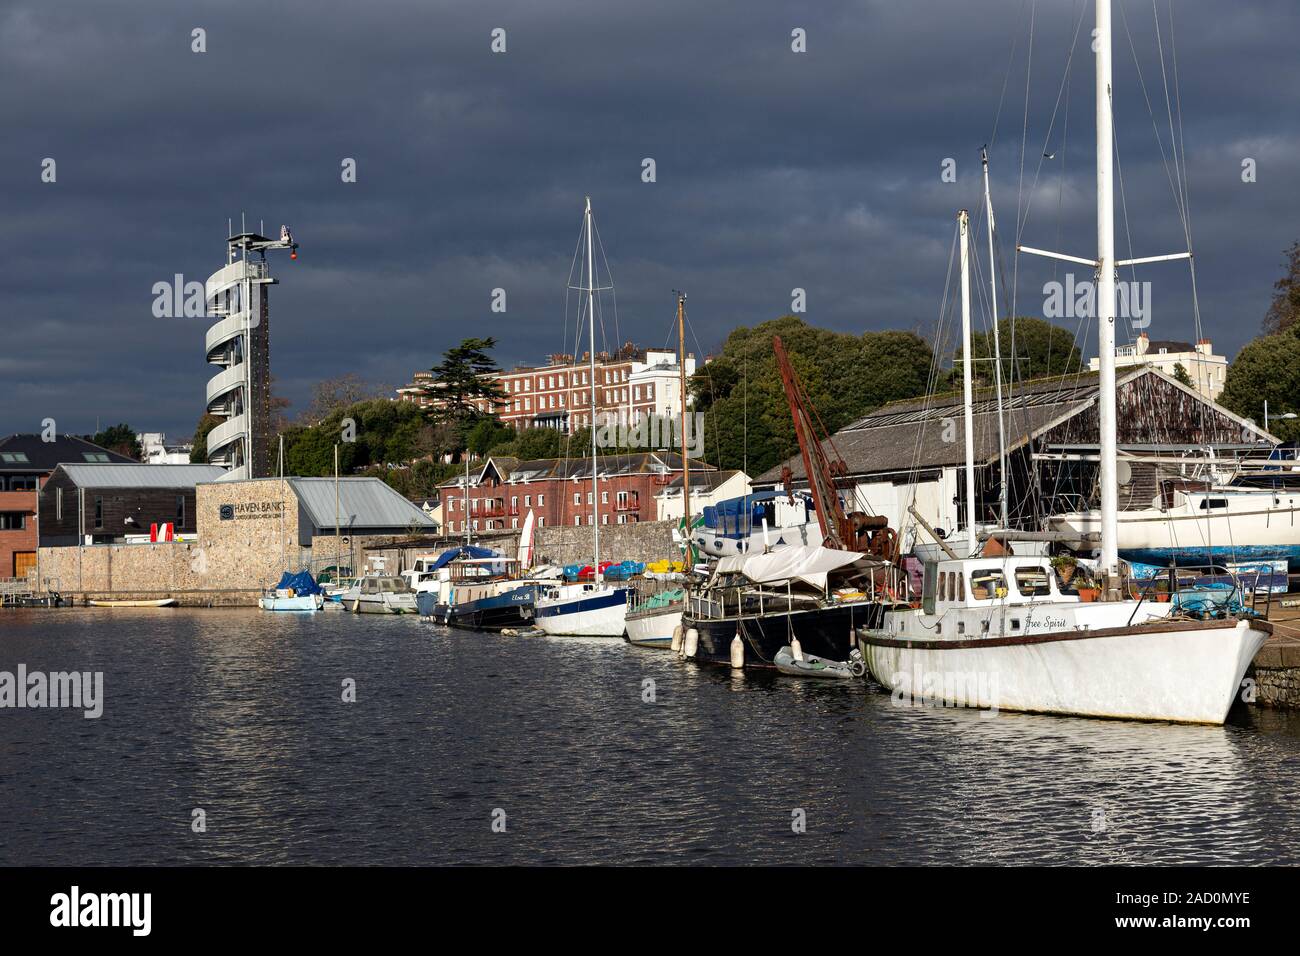 Exeter Canal basin,Cafe, Canal, City, Commercial Dock, Devon, Devonian, Drink, England, Europe, Exeter - England, Geographical Locations, Stock Photo